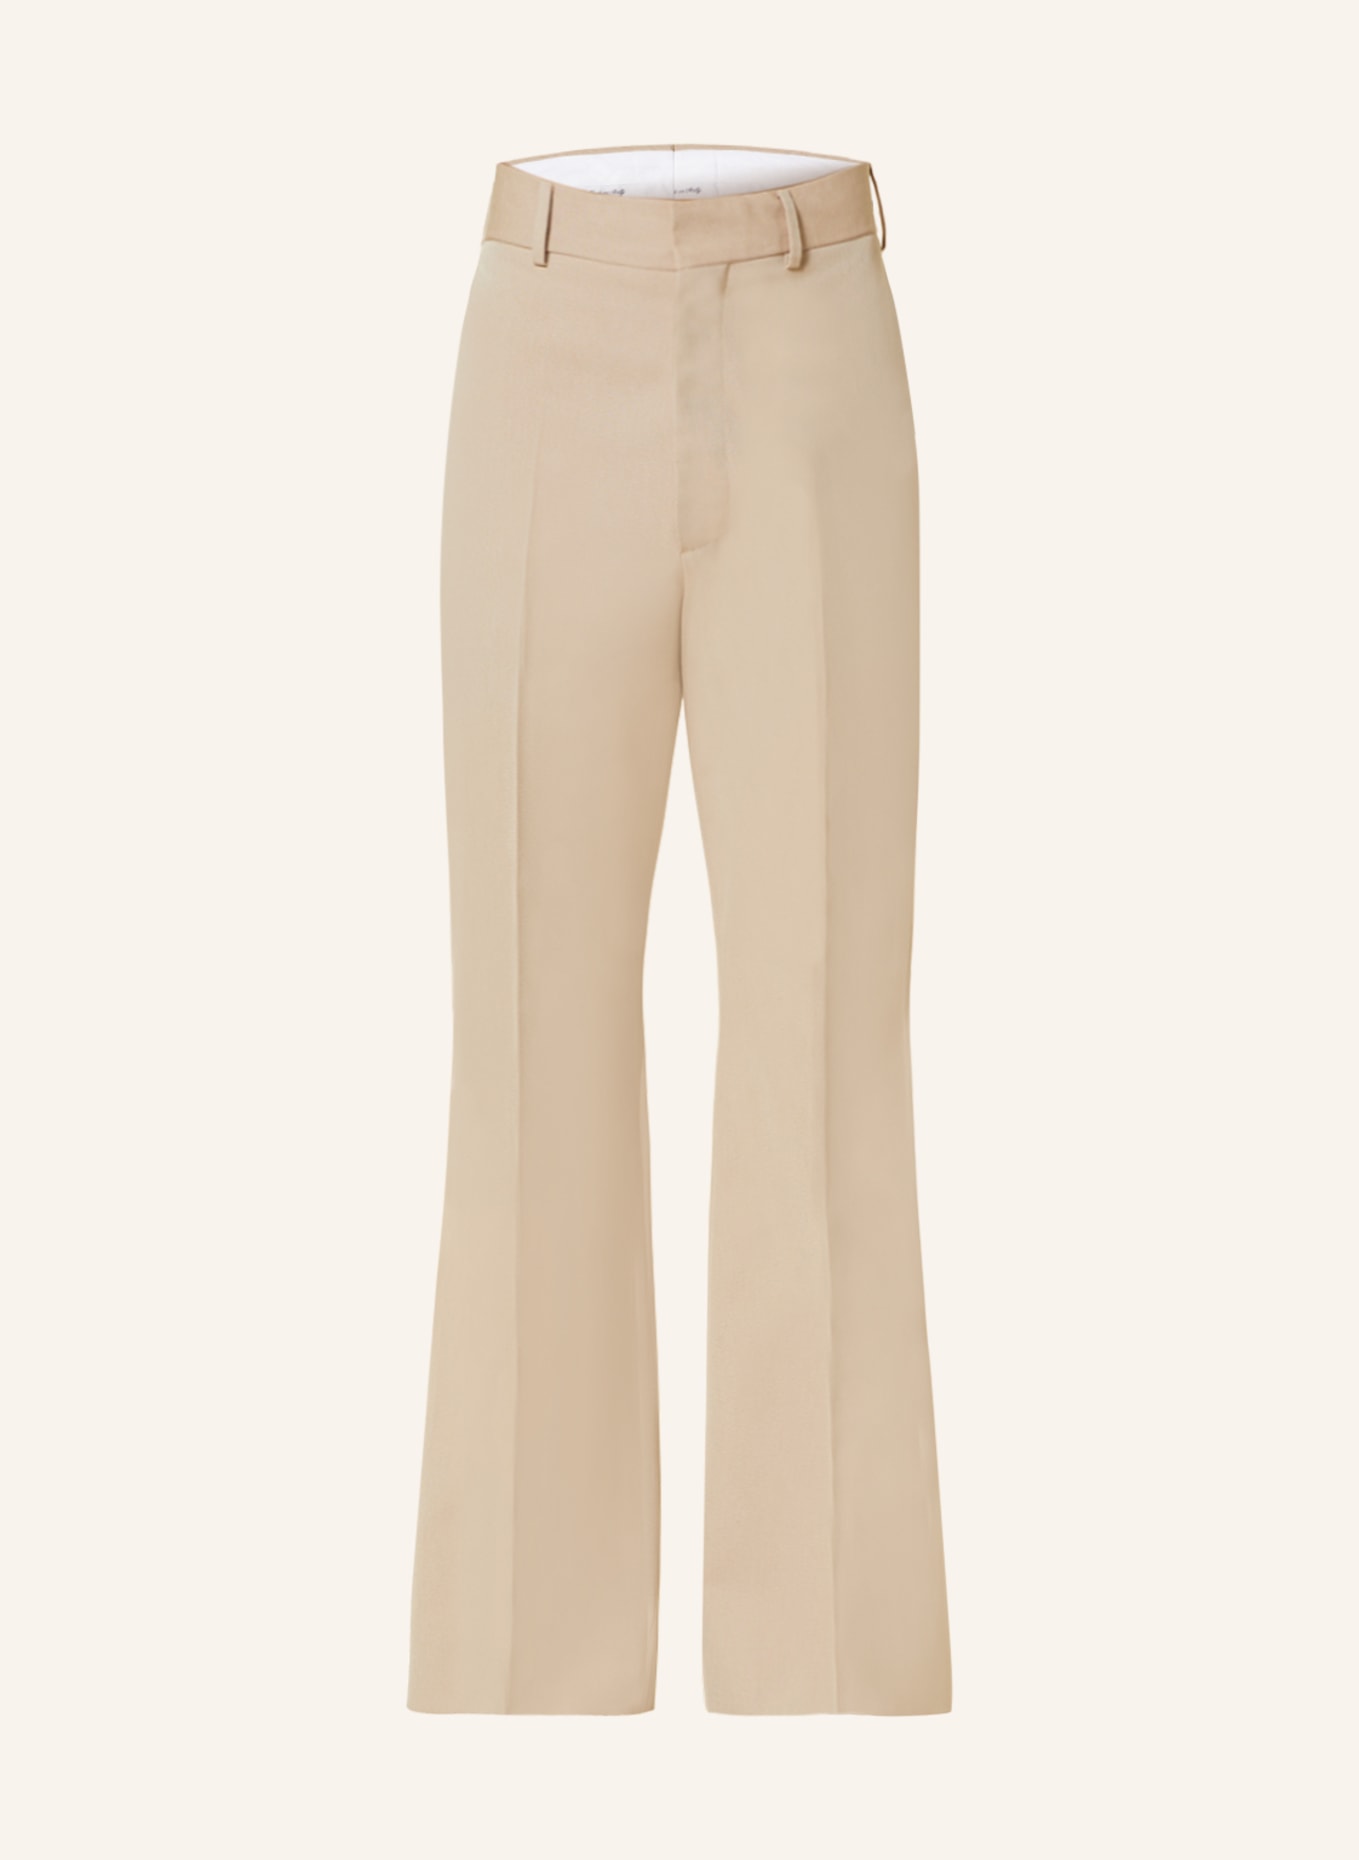 Mens White Flared Trousers, Mens Flared Suit Trousers